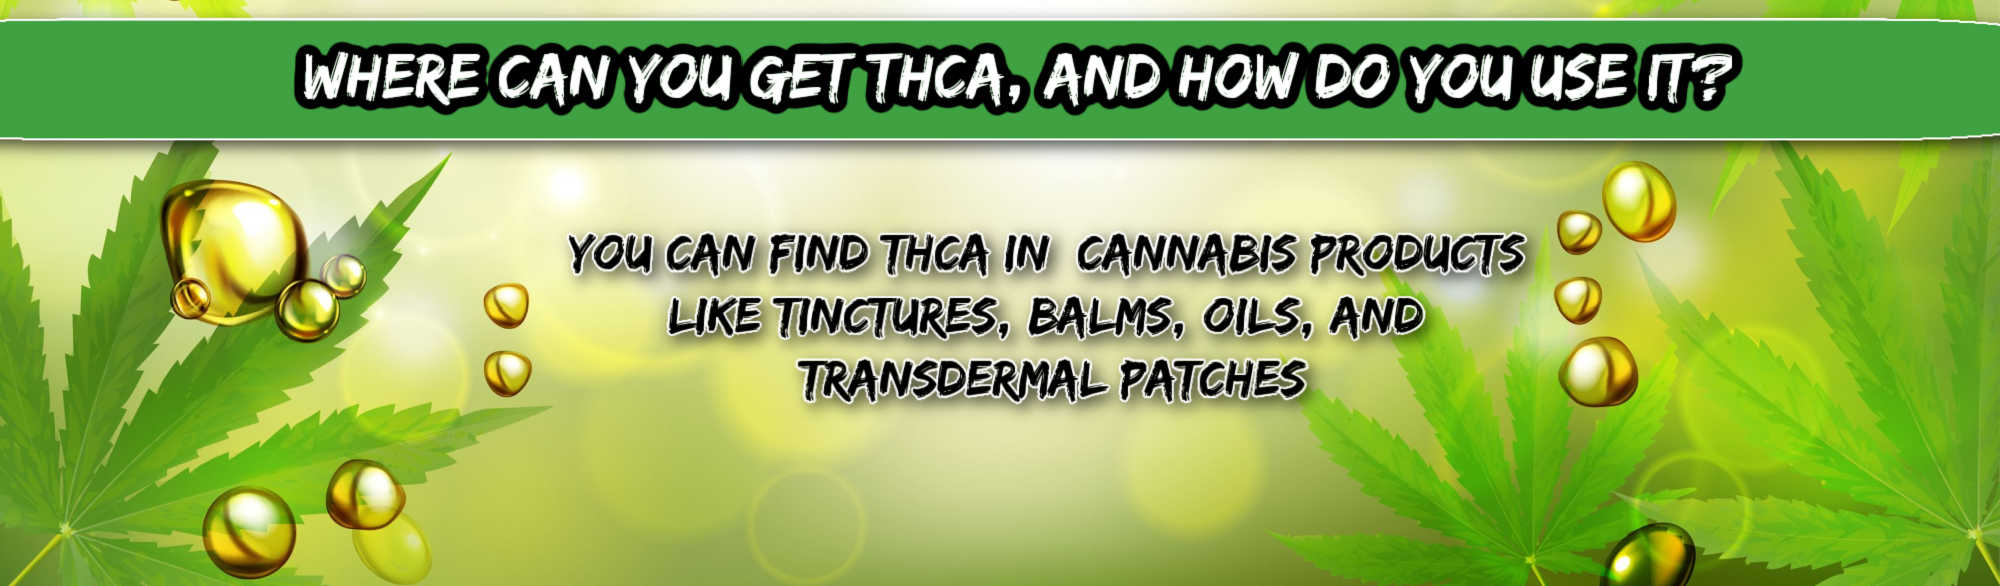 image of where can you get thca and how do you use this